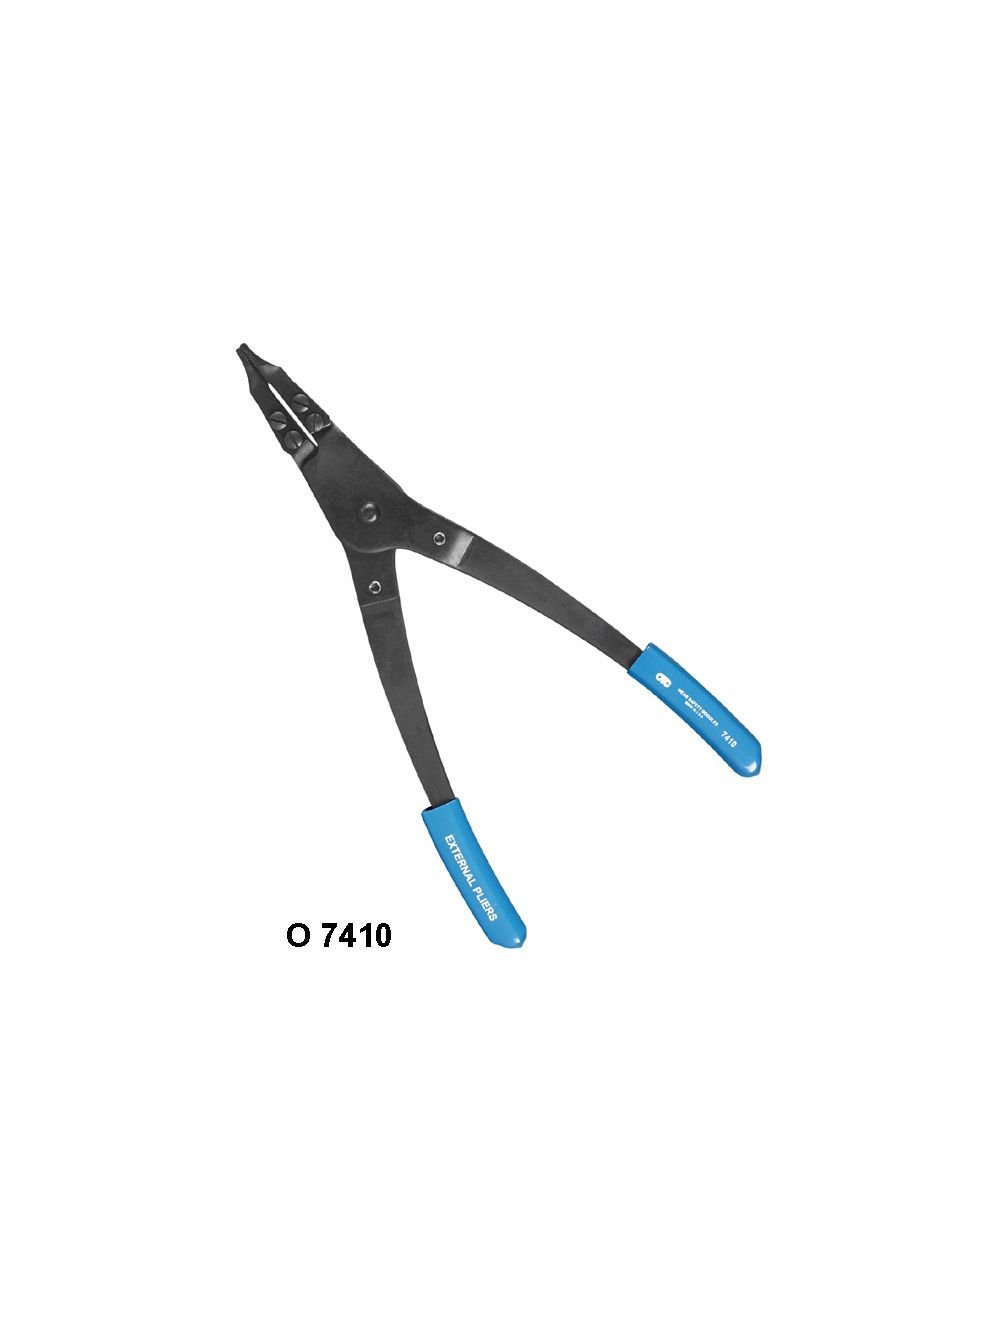 Williams® PL-531 Fixed Tip Internal Retaining Ring Plier, 3/32 to 2-3/8 in,  7/8 in L High Carbon Steel Jaw